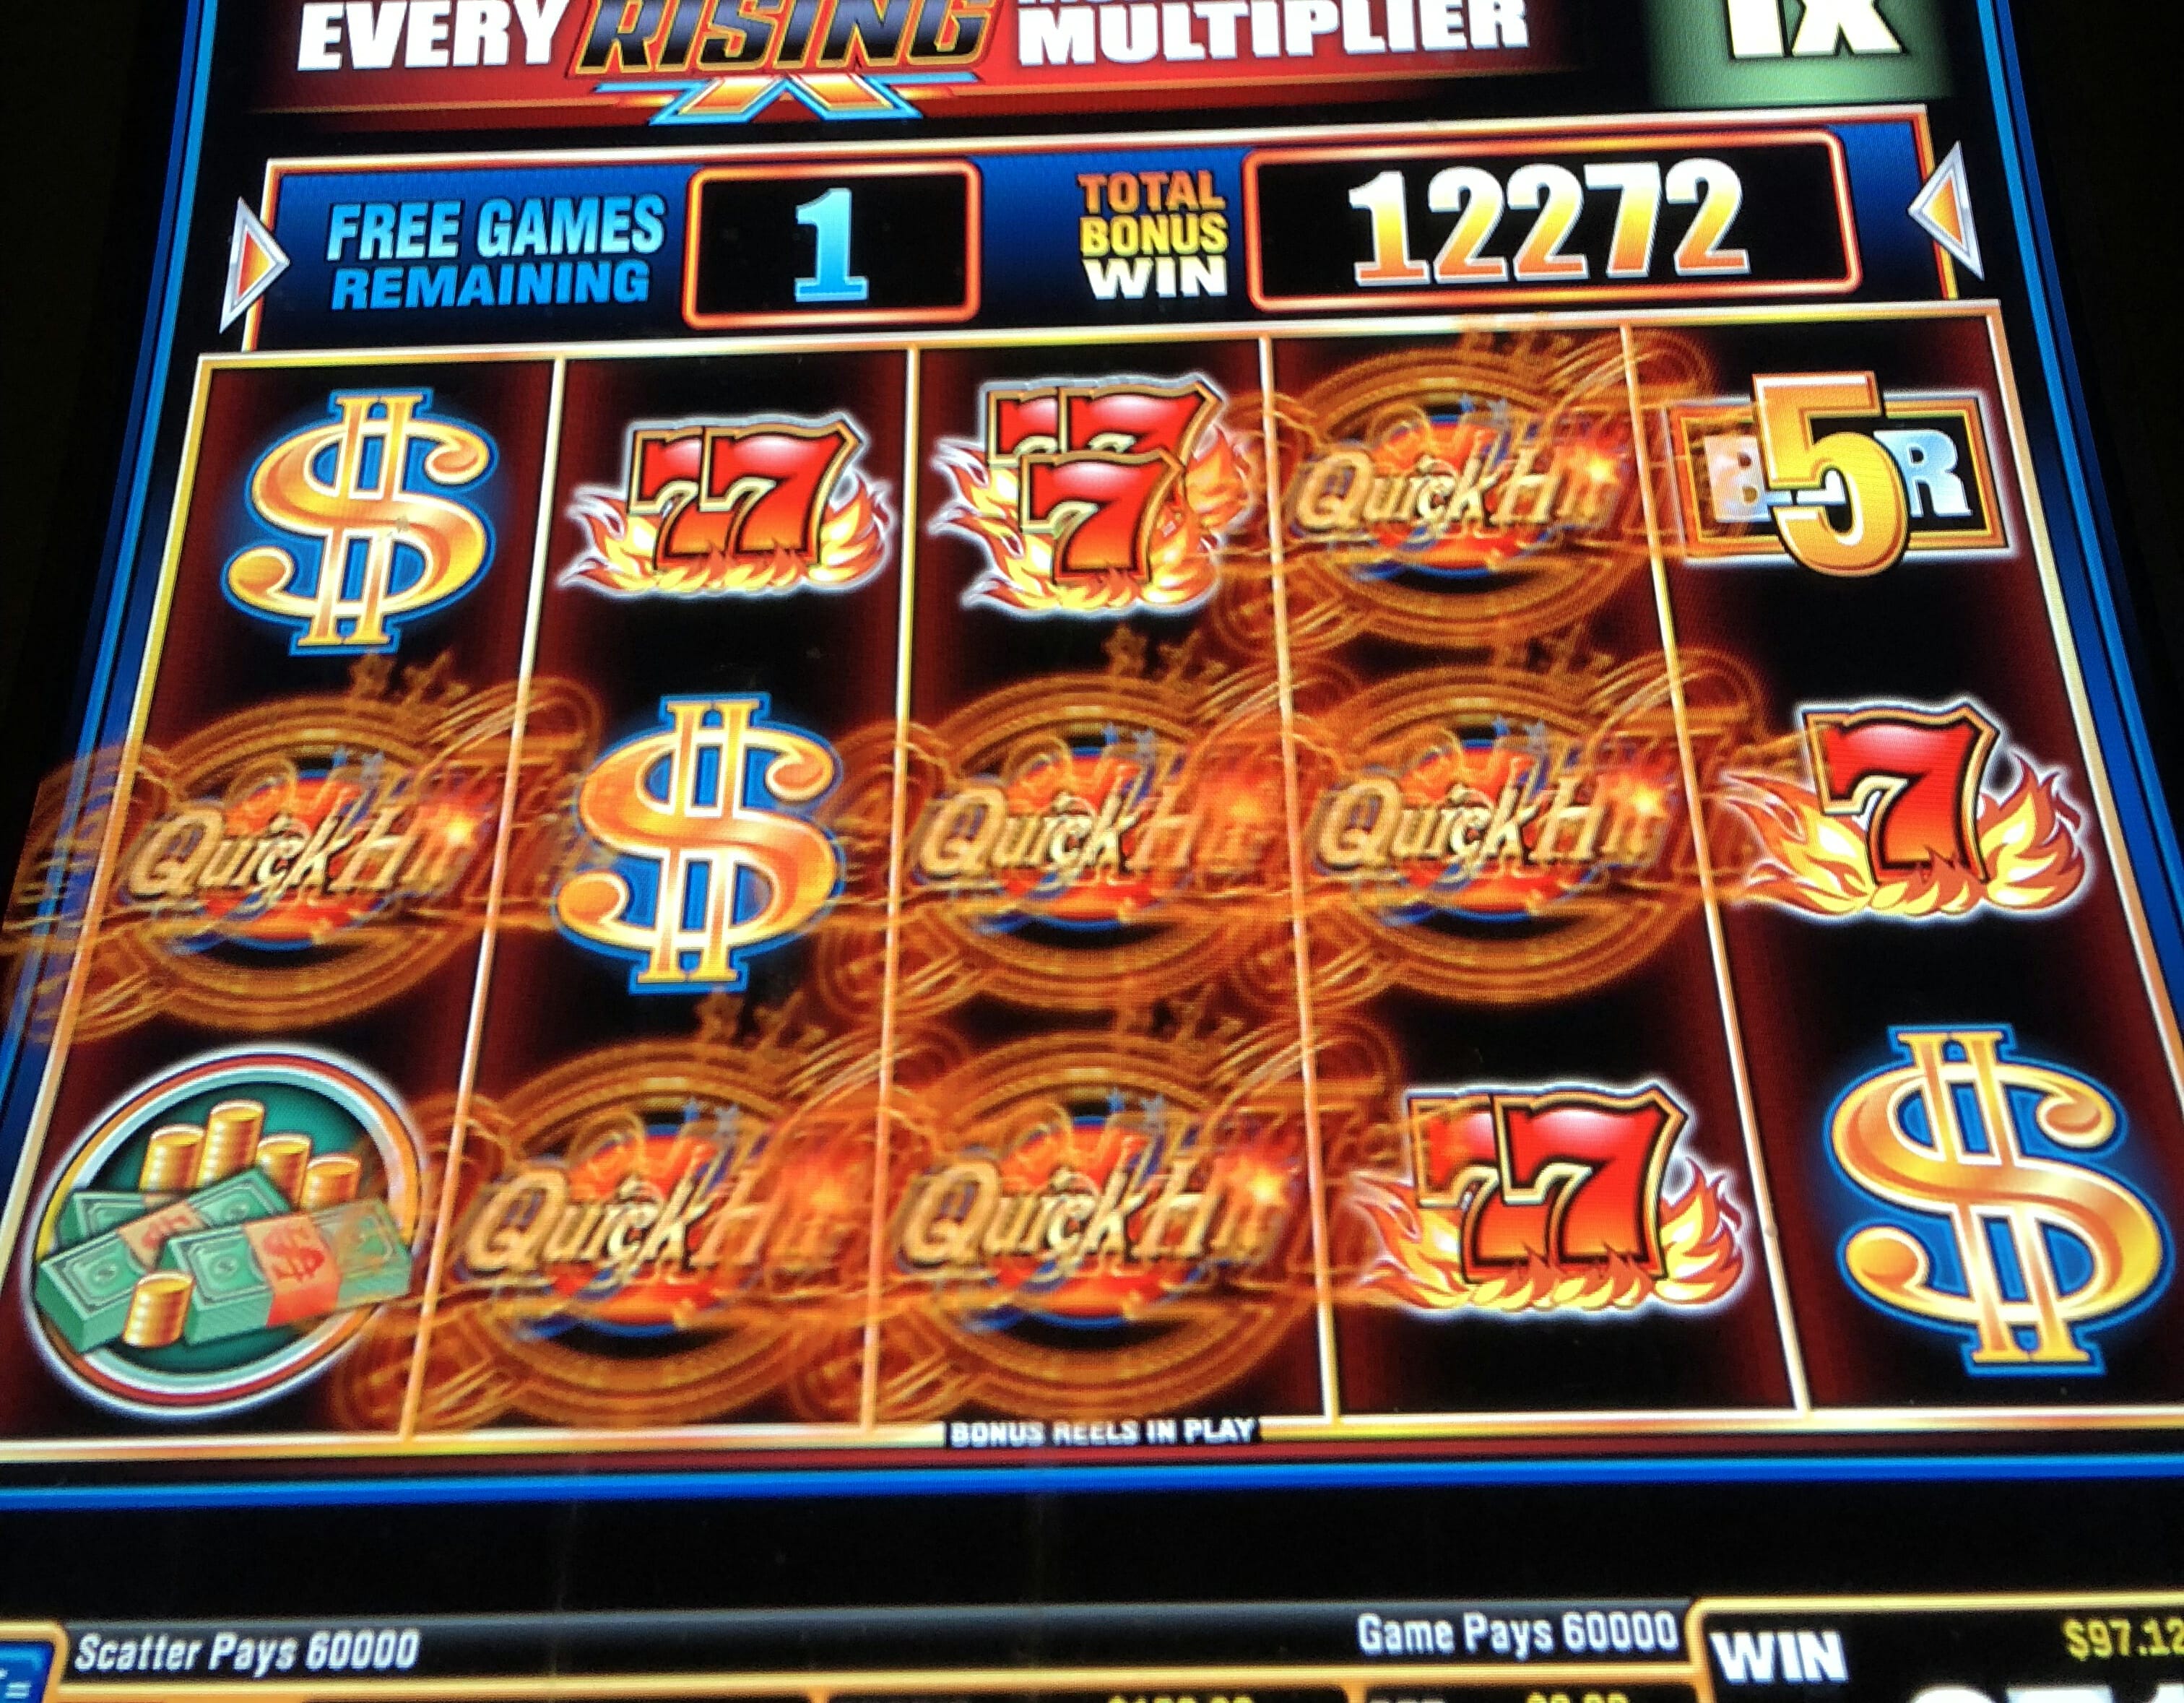 How to know which slot machine will hit back